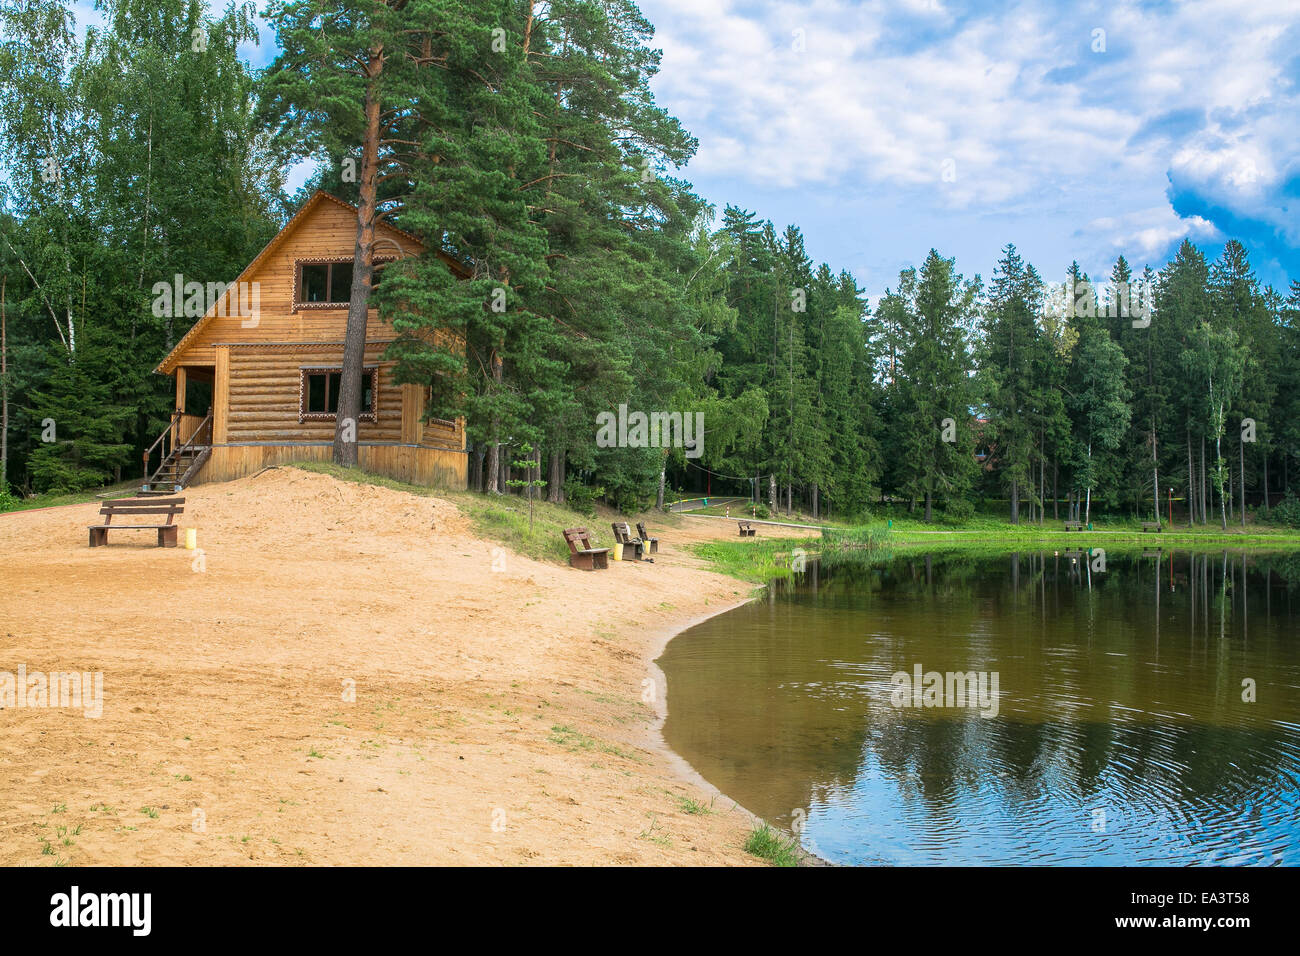 Wooden house at lake's shore, Moscow region, Russia Stock Photo